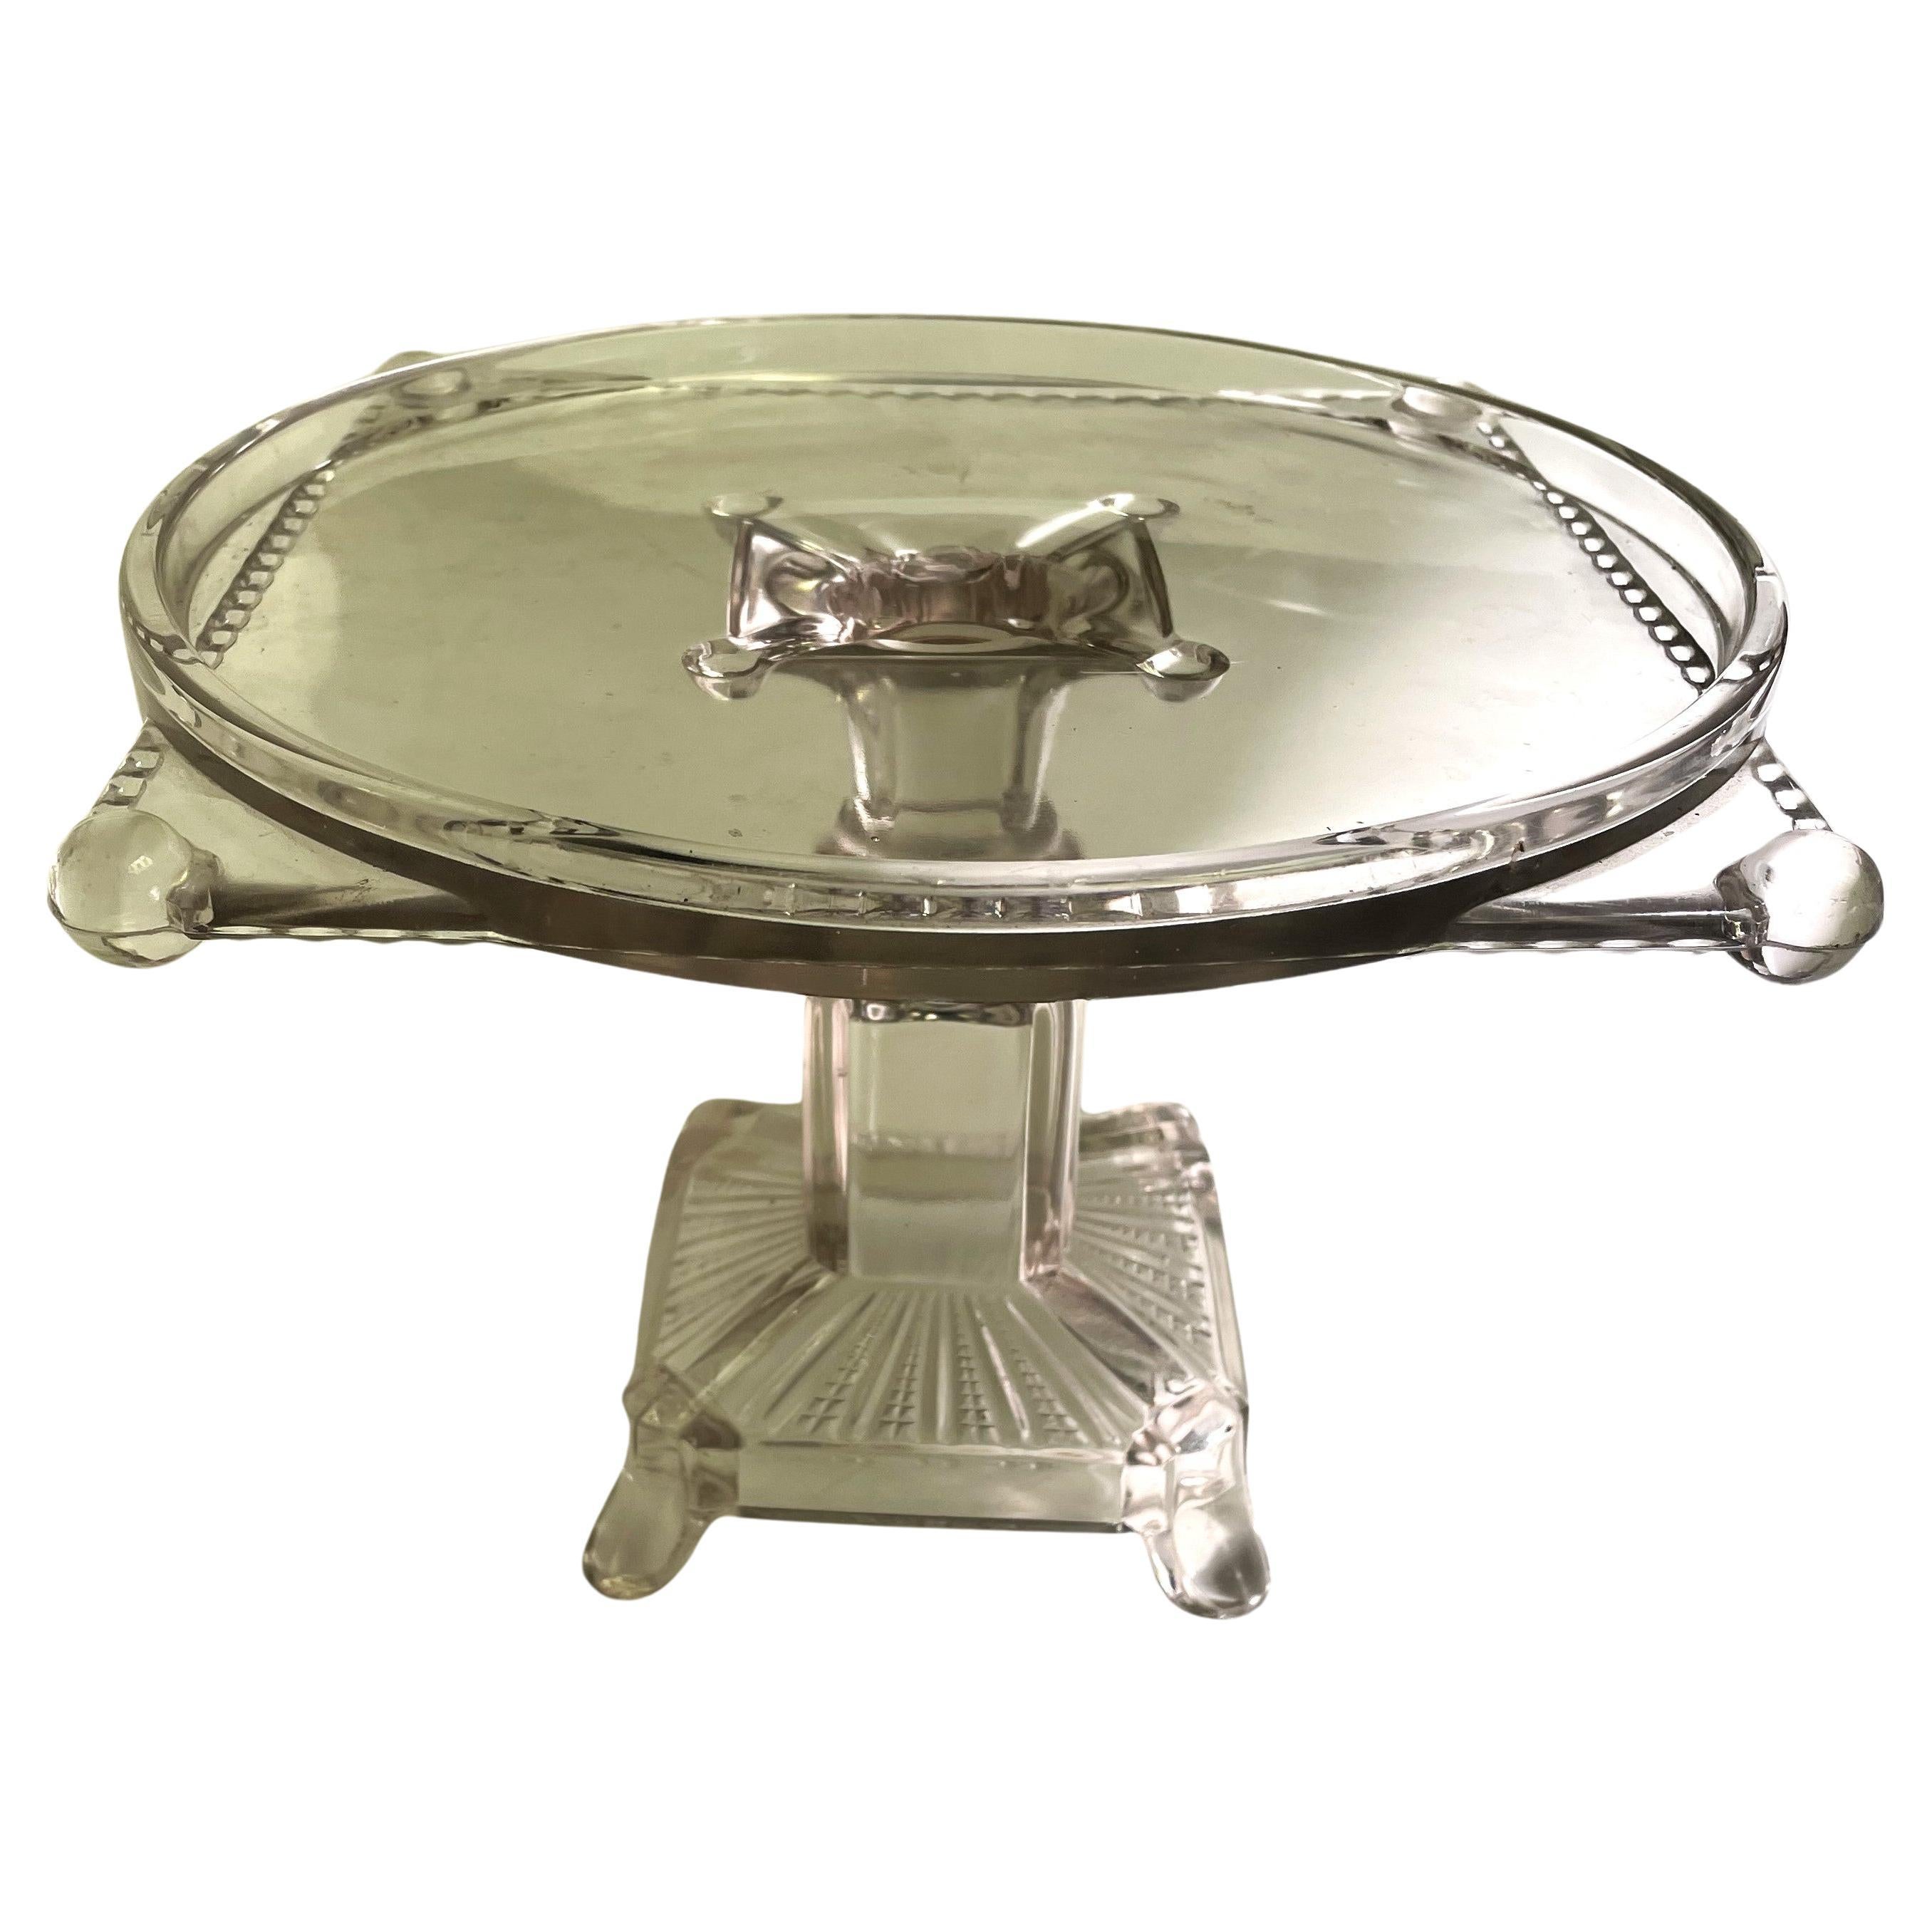 Antique Clear Pressed Glass Pedestal Patisserie Cake Stand Serving Plate Square For Sale